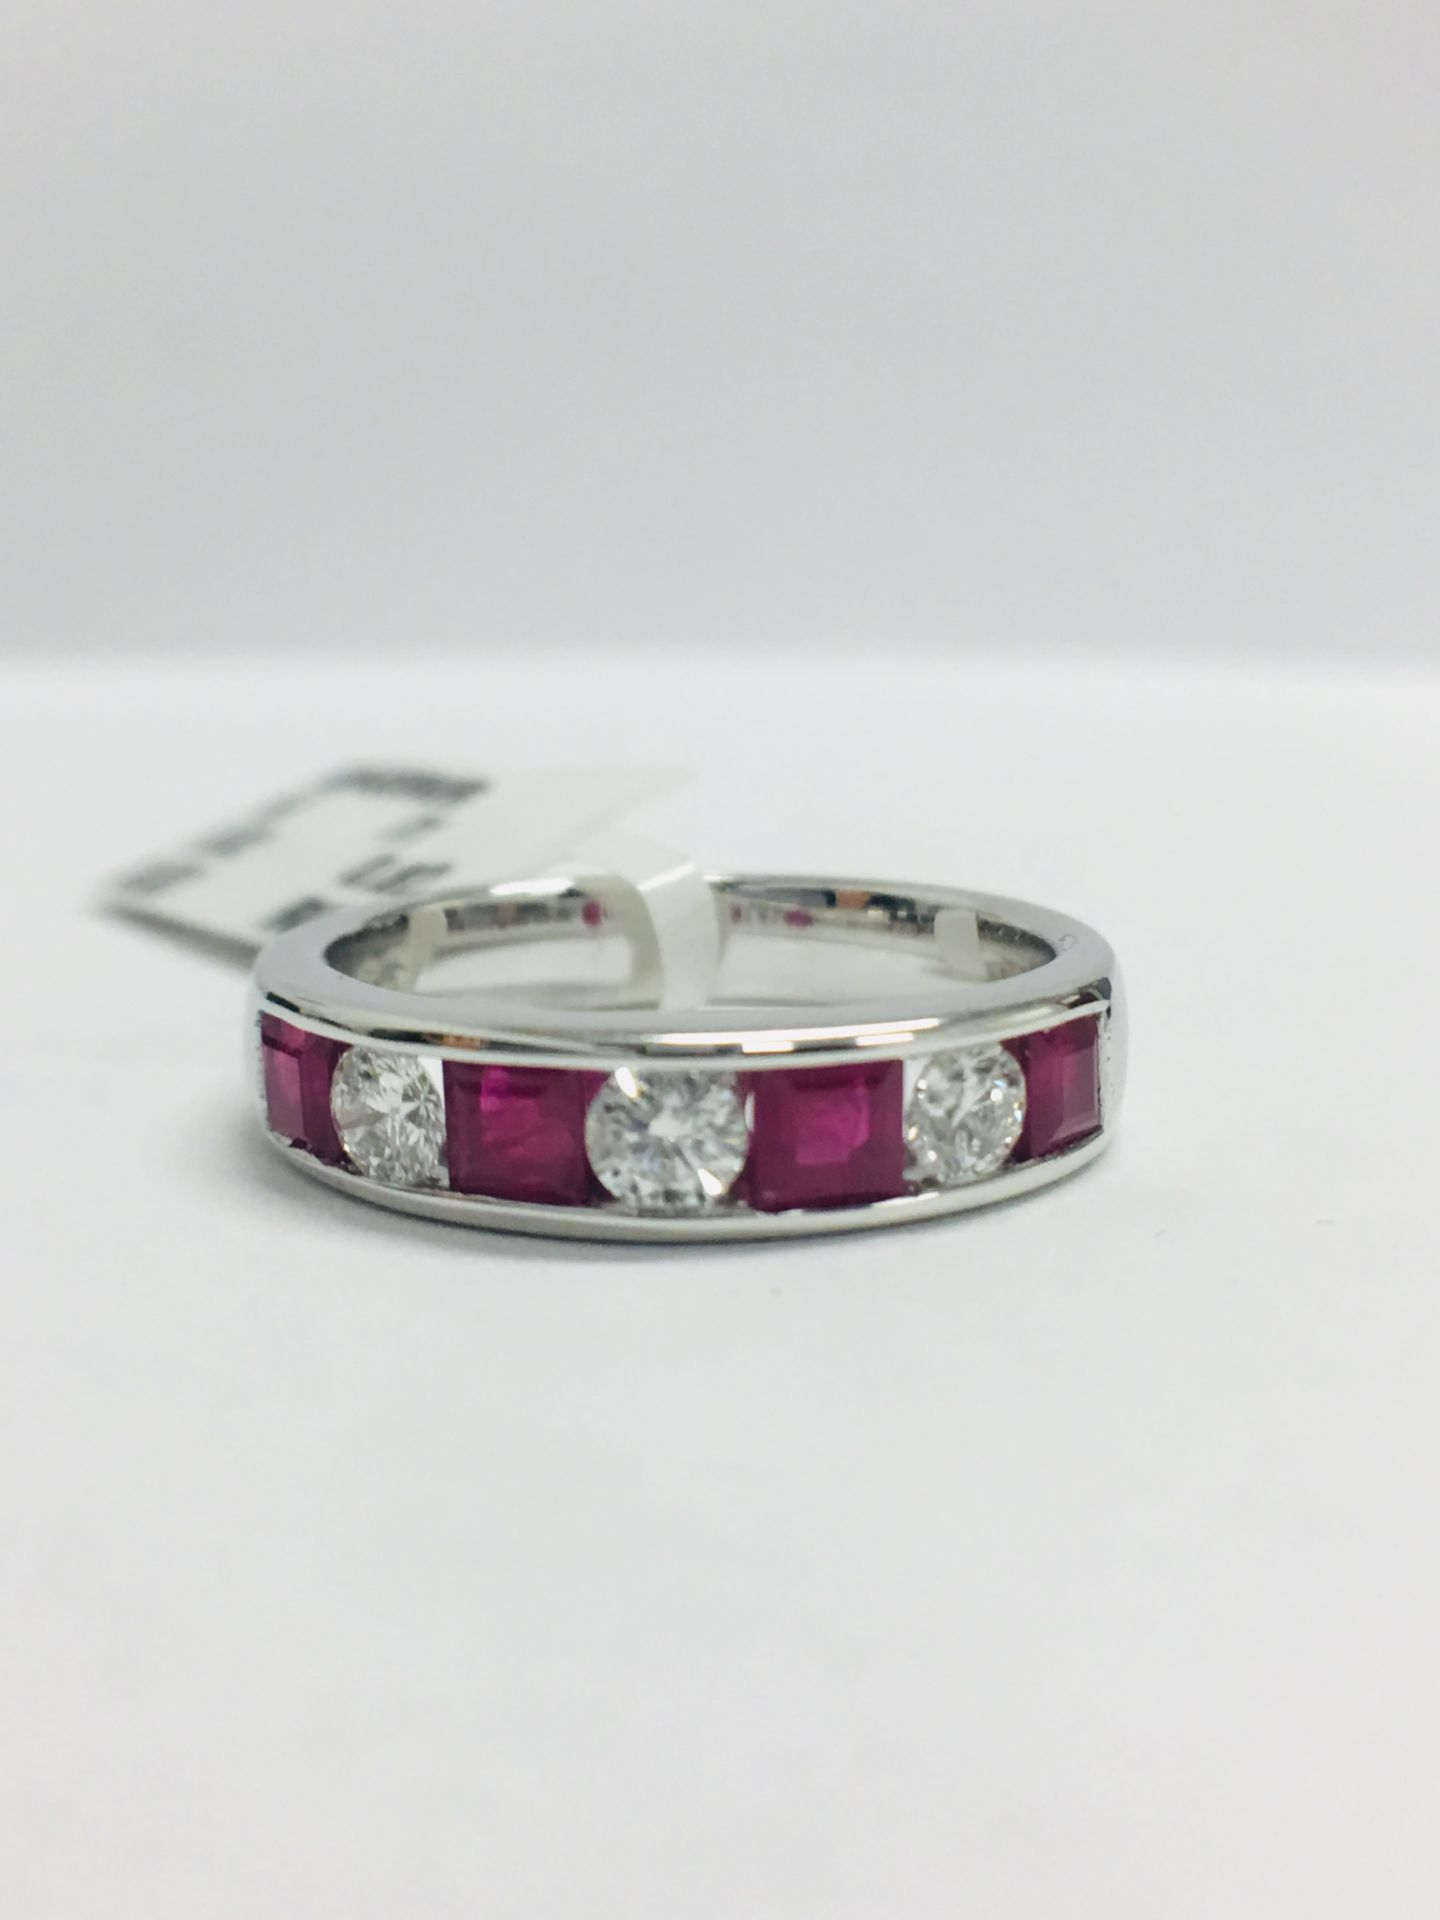 9ct White Gold Ruby Diamond Channel Set Ring - Image 8 of 9